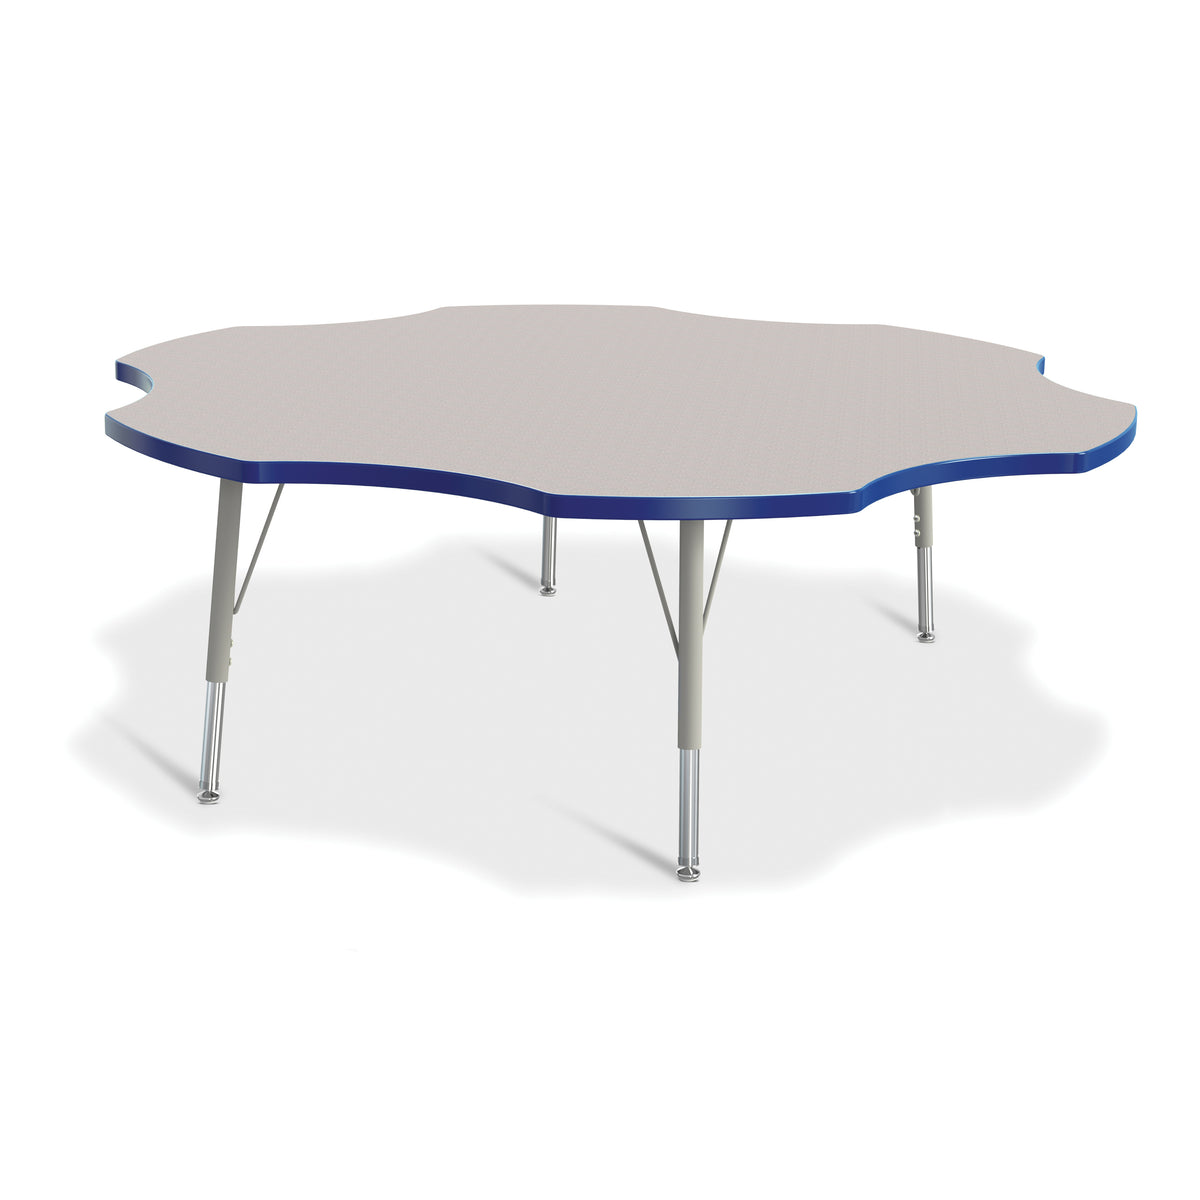 6458JCE003, Berries Six Leaf Activity Table - 60", E-height - Freckled Gray/Blue/Gray